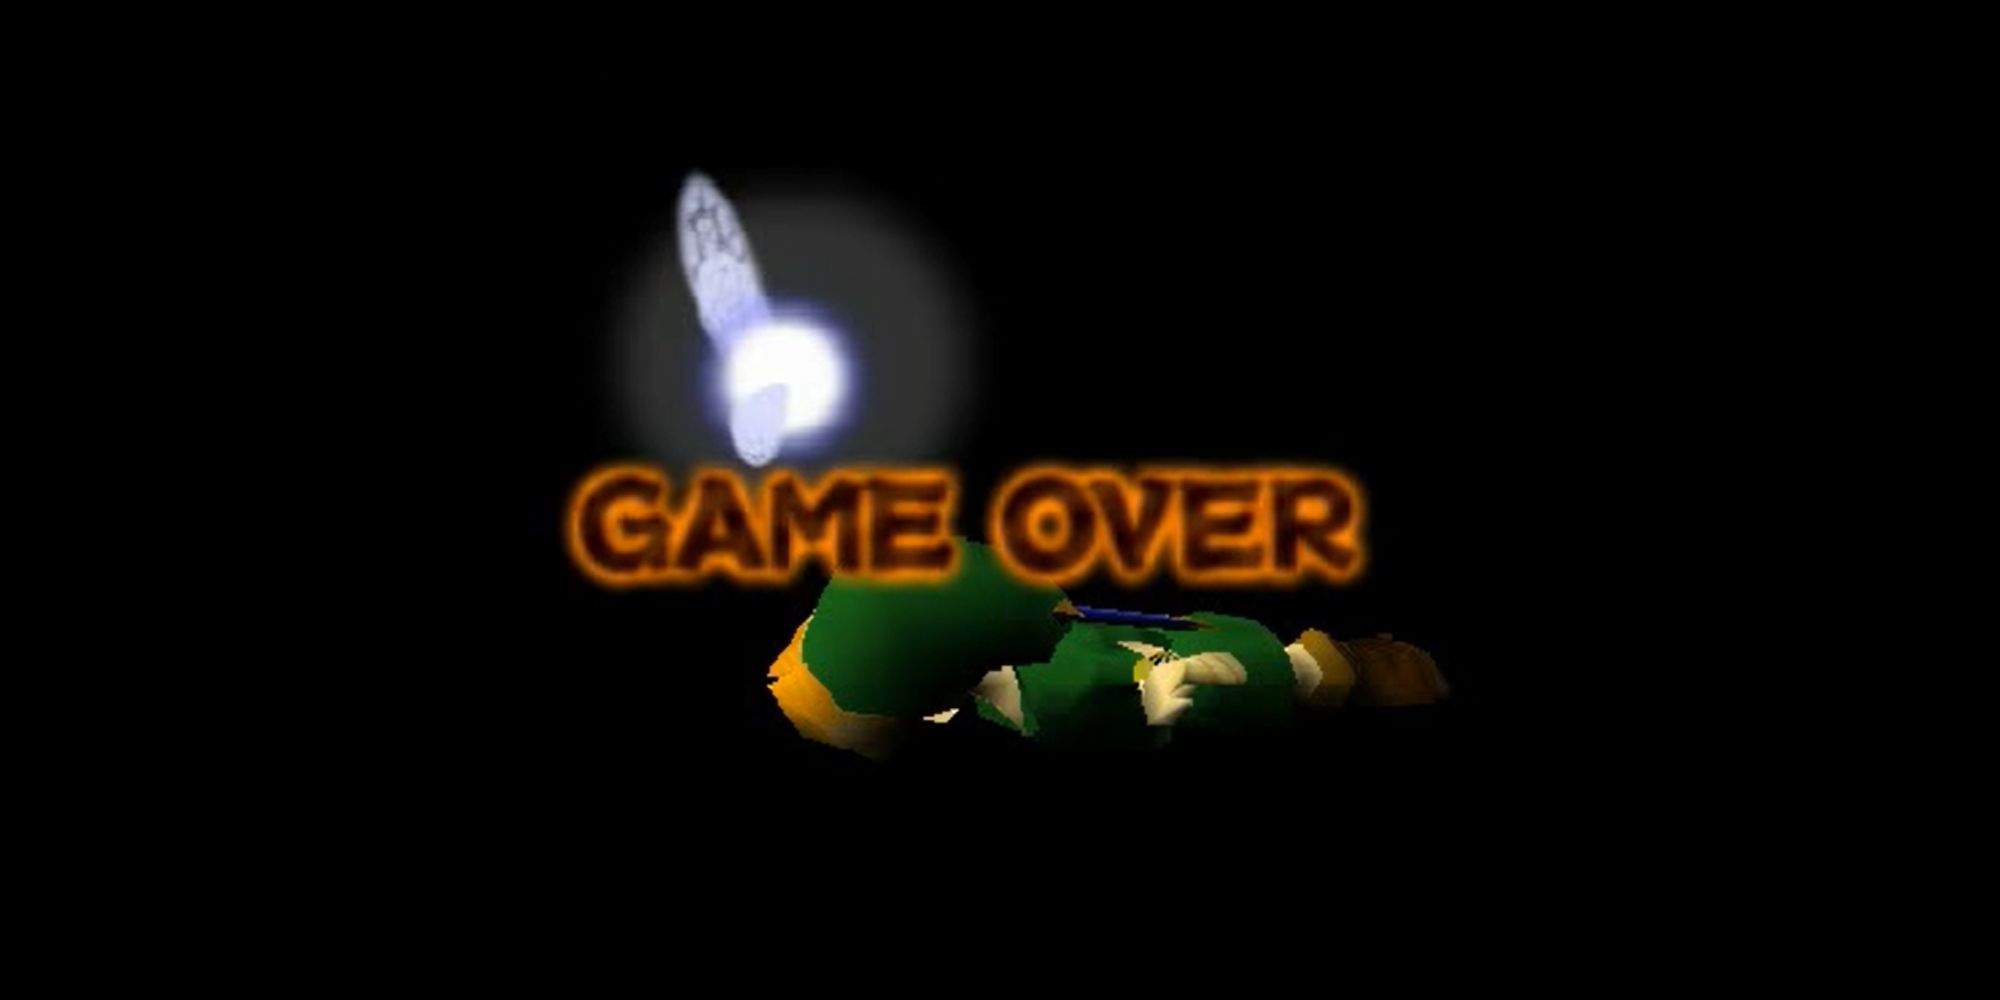 Game Over screen for The Legend Of Zelda